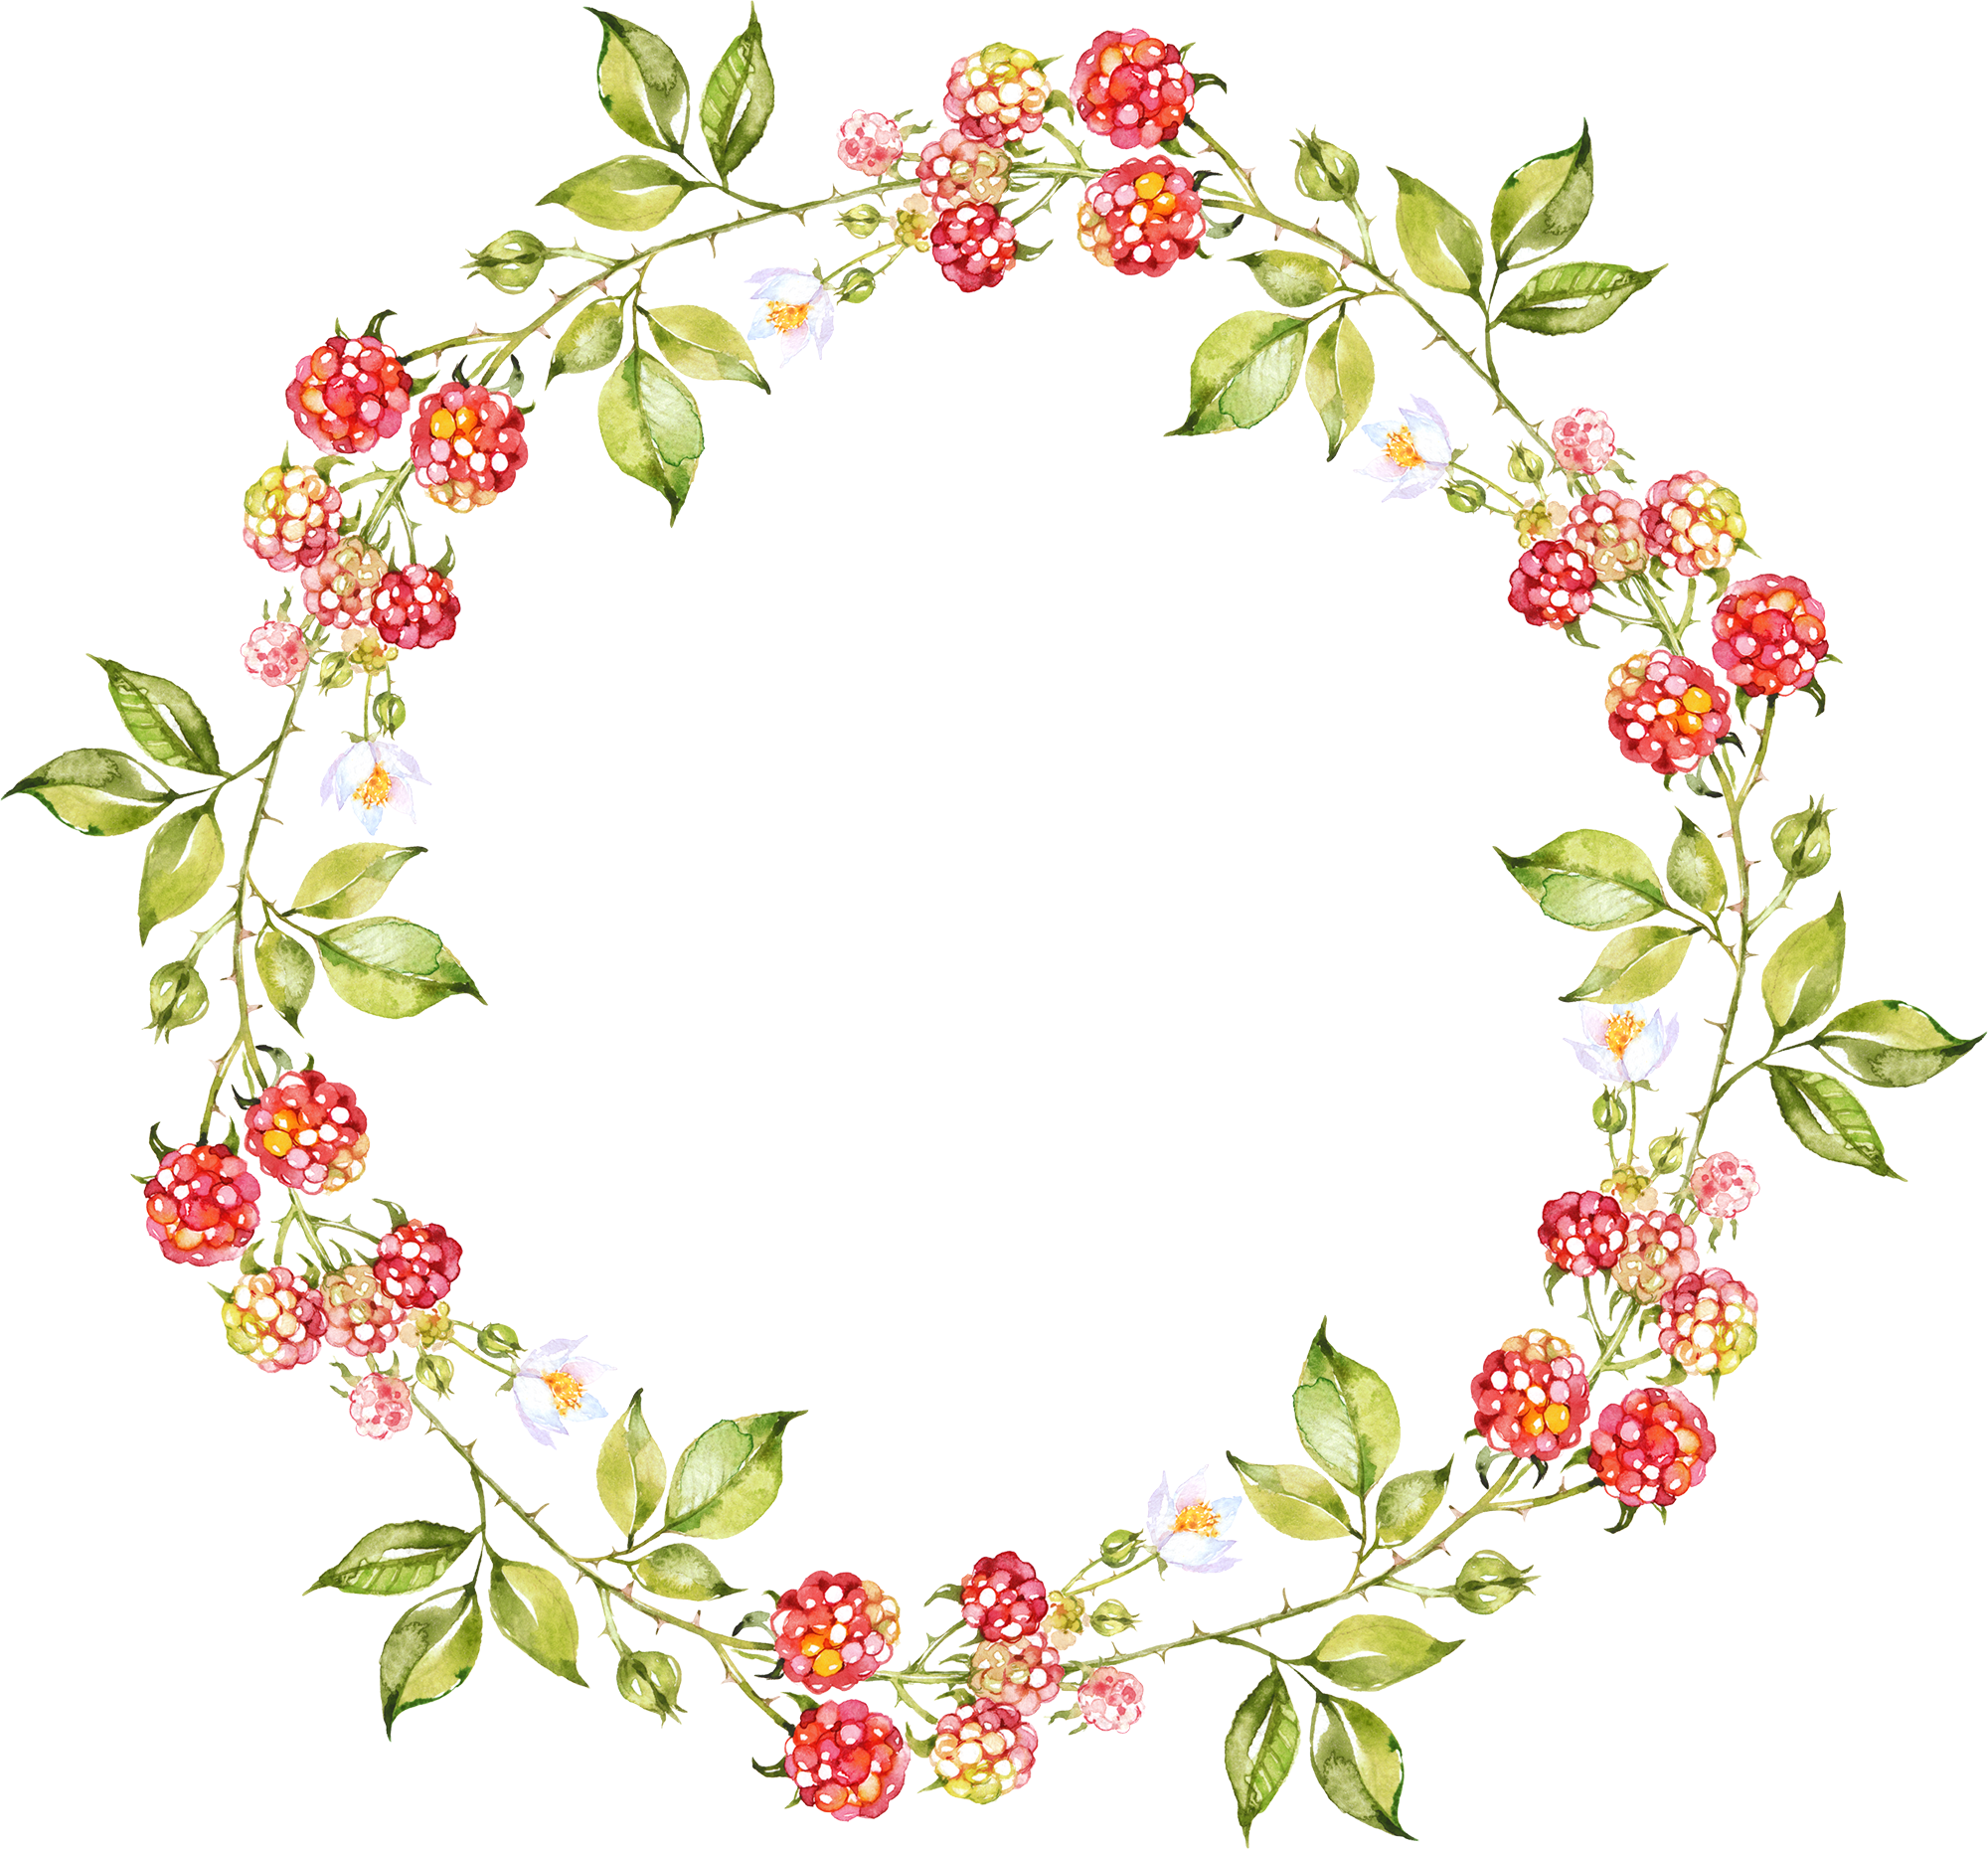 Oval clipart floral wreath, Oval floral wreath Transparent